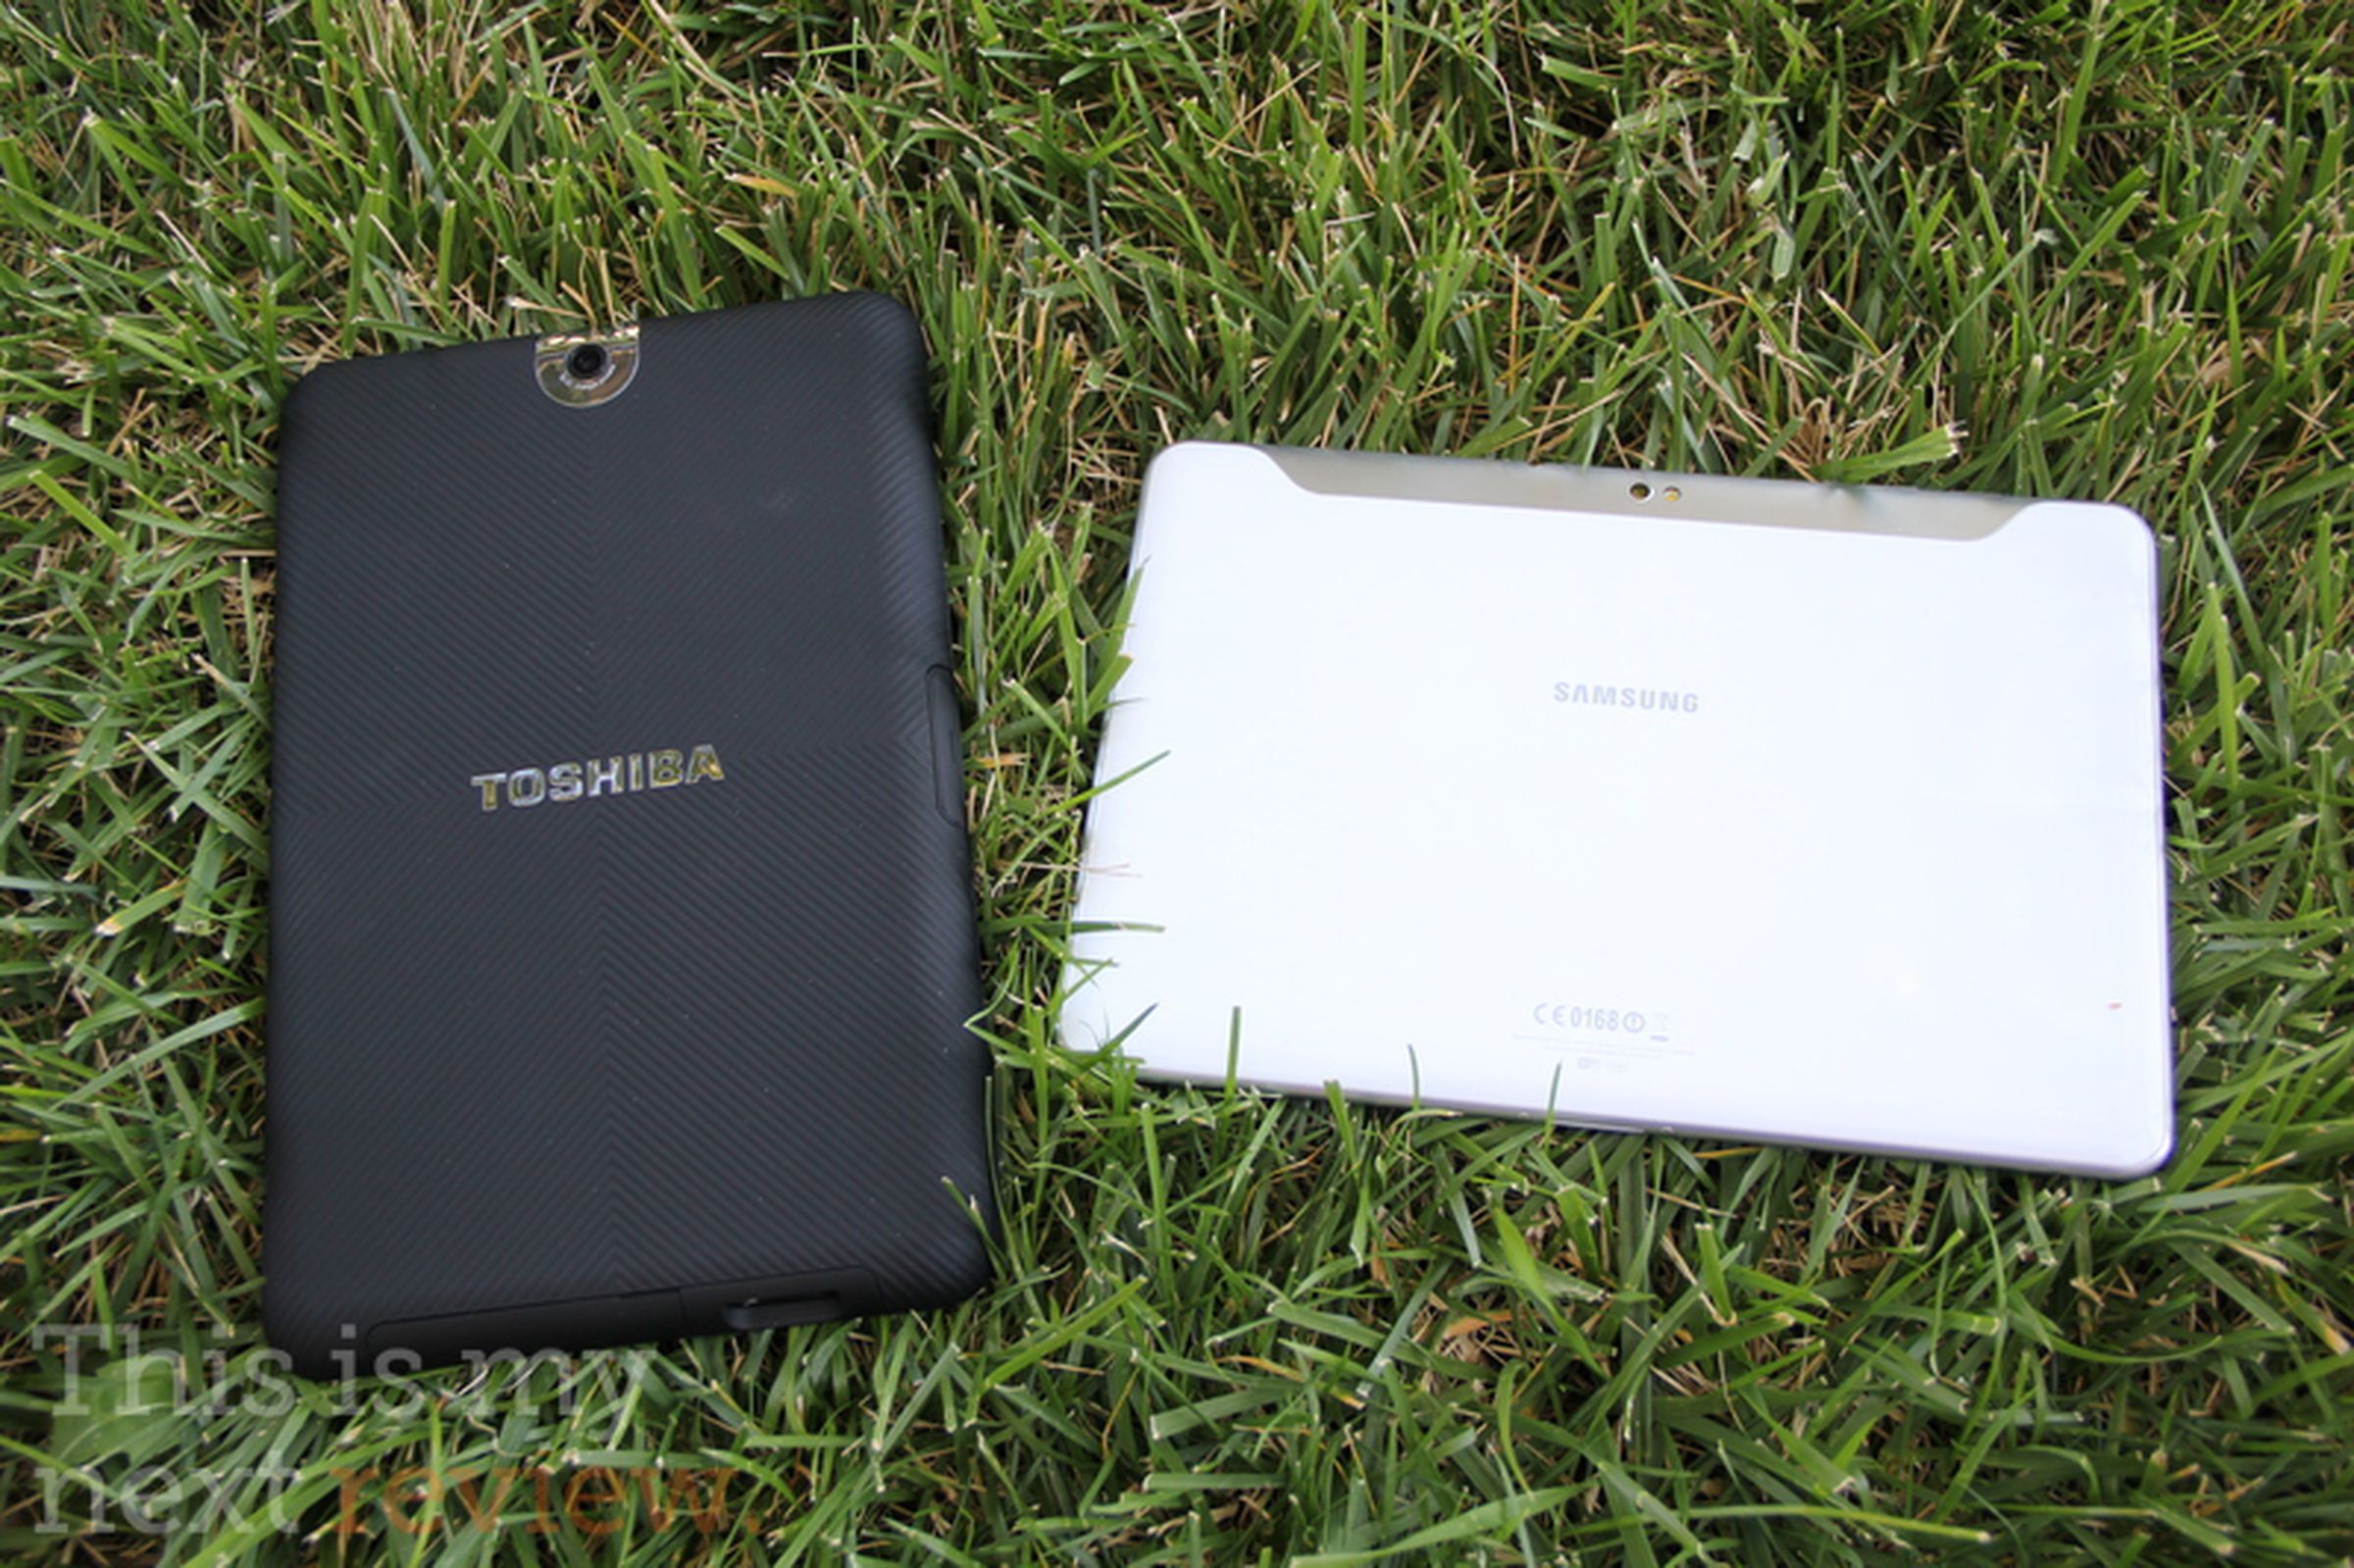 Toshiba Thrive review pictures